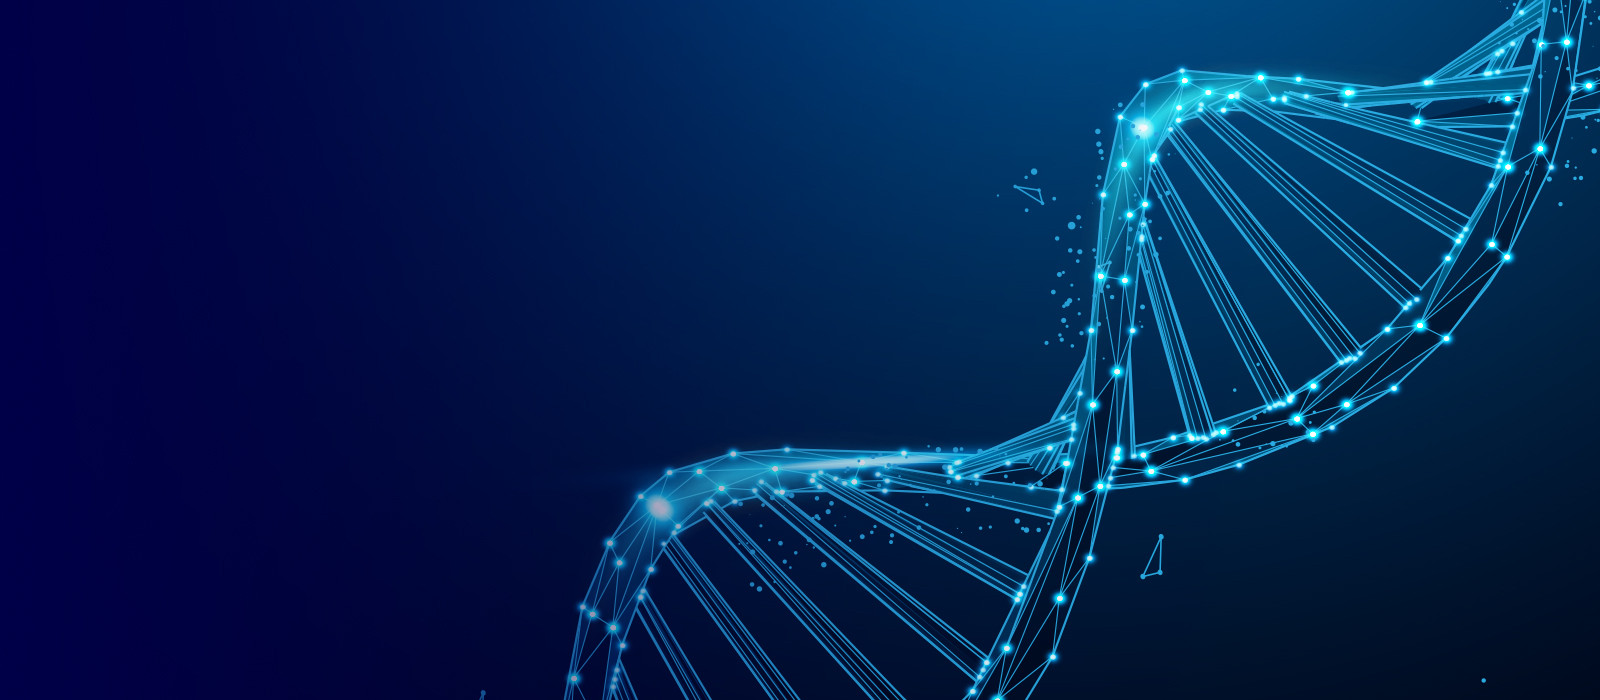 Abstract digital wavy image with dots and lines in dark blue background resembling DNA